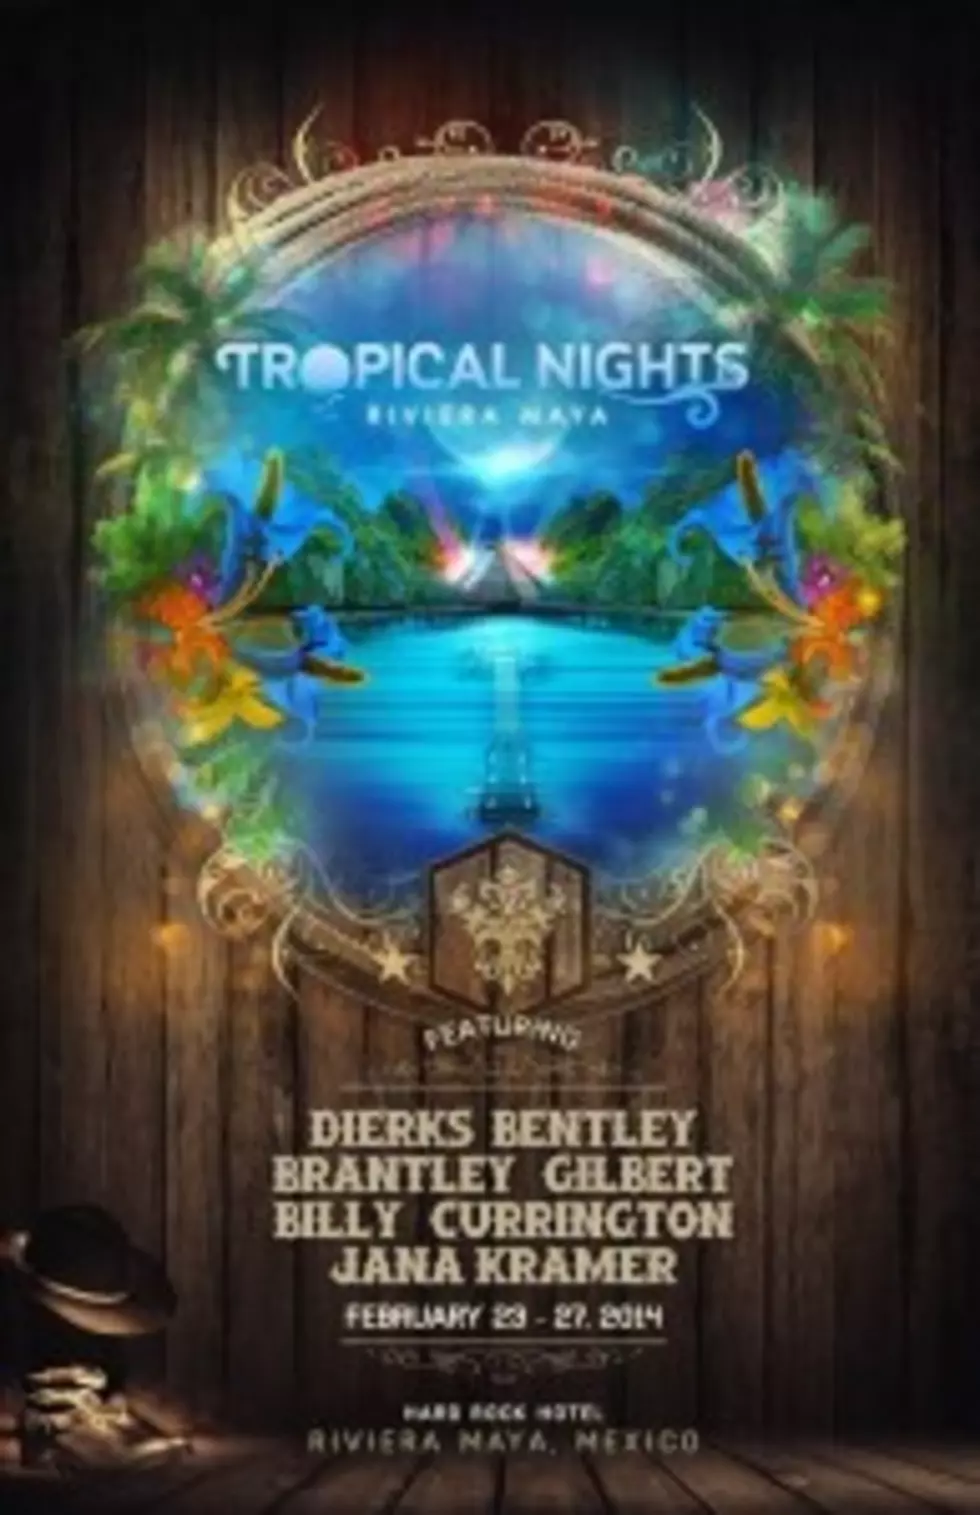 Tropical Nights with Dierks, Brantley, Billy and Jana